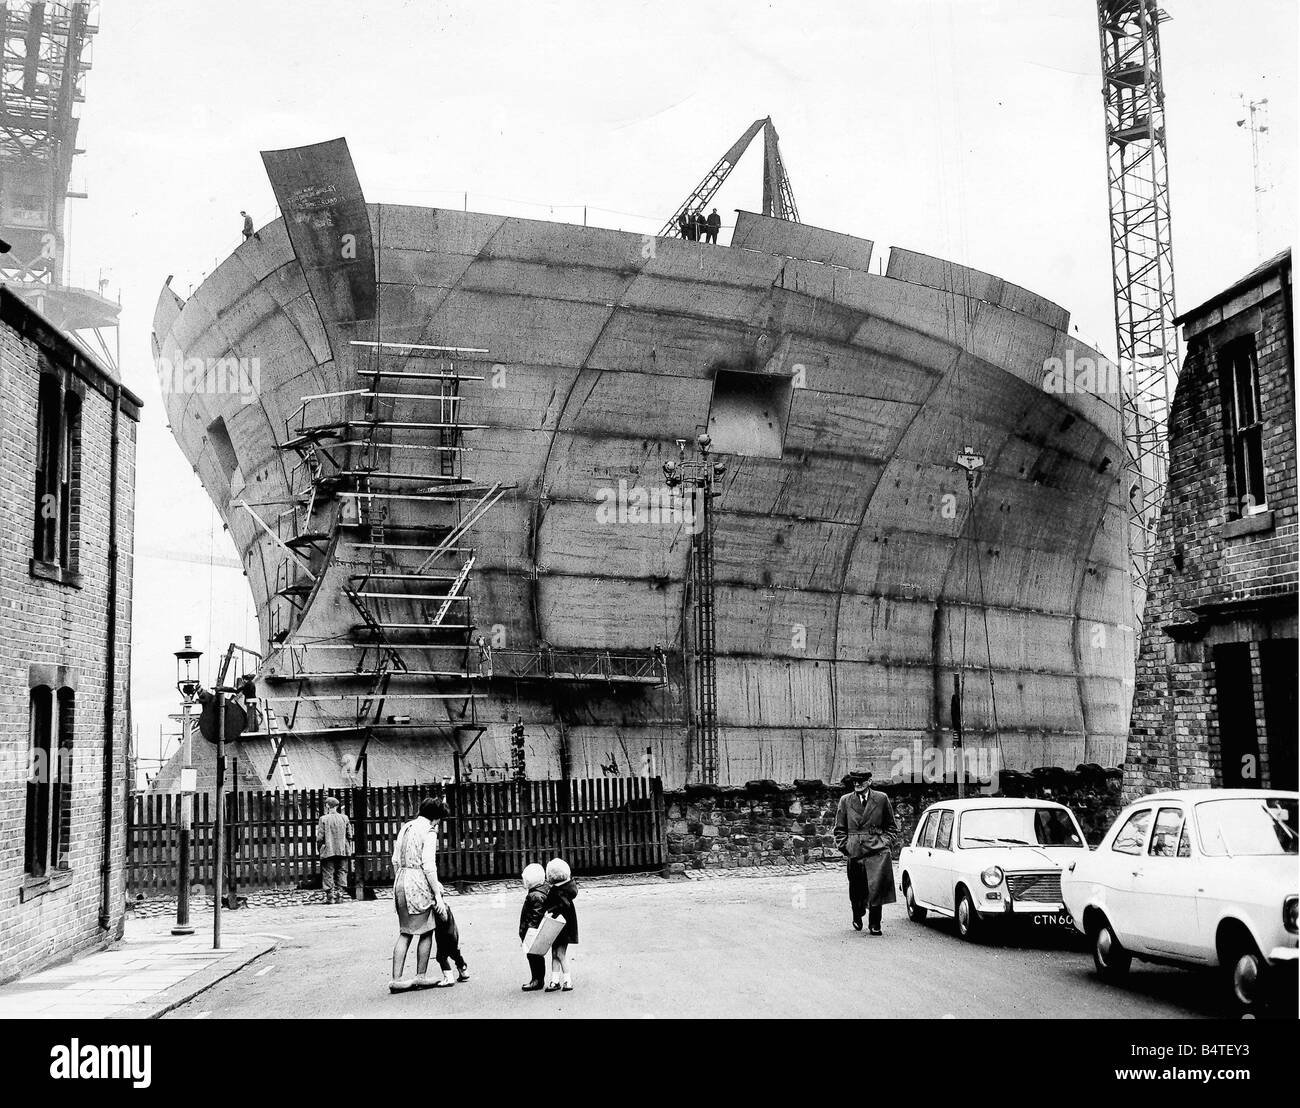 The Esso Northumbria supertanker being built at Swan Hunter shipyard in Wallsend Stock Photo